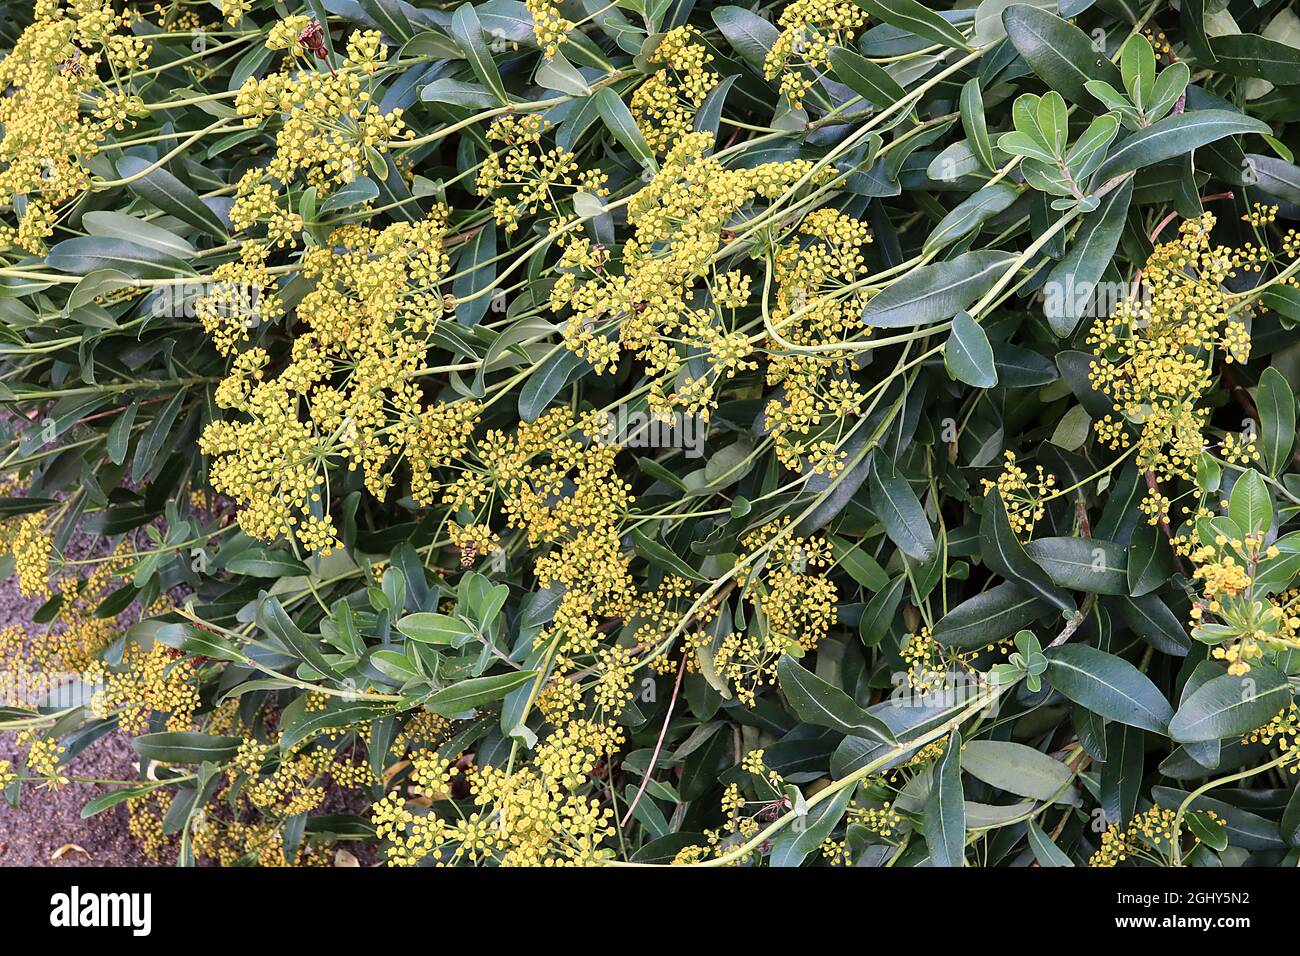 Bupleurum fruticosum shrubby hare’s ear – domed clusters of tiny yellow flowers and glossy dark green leaves,  August, England, UK Stock Photo